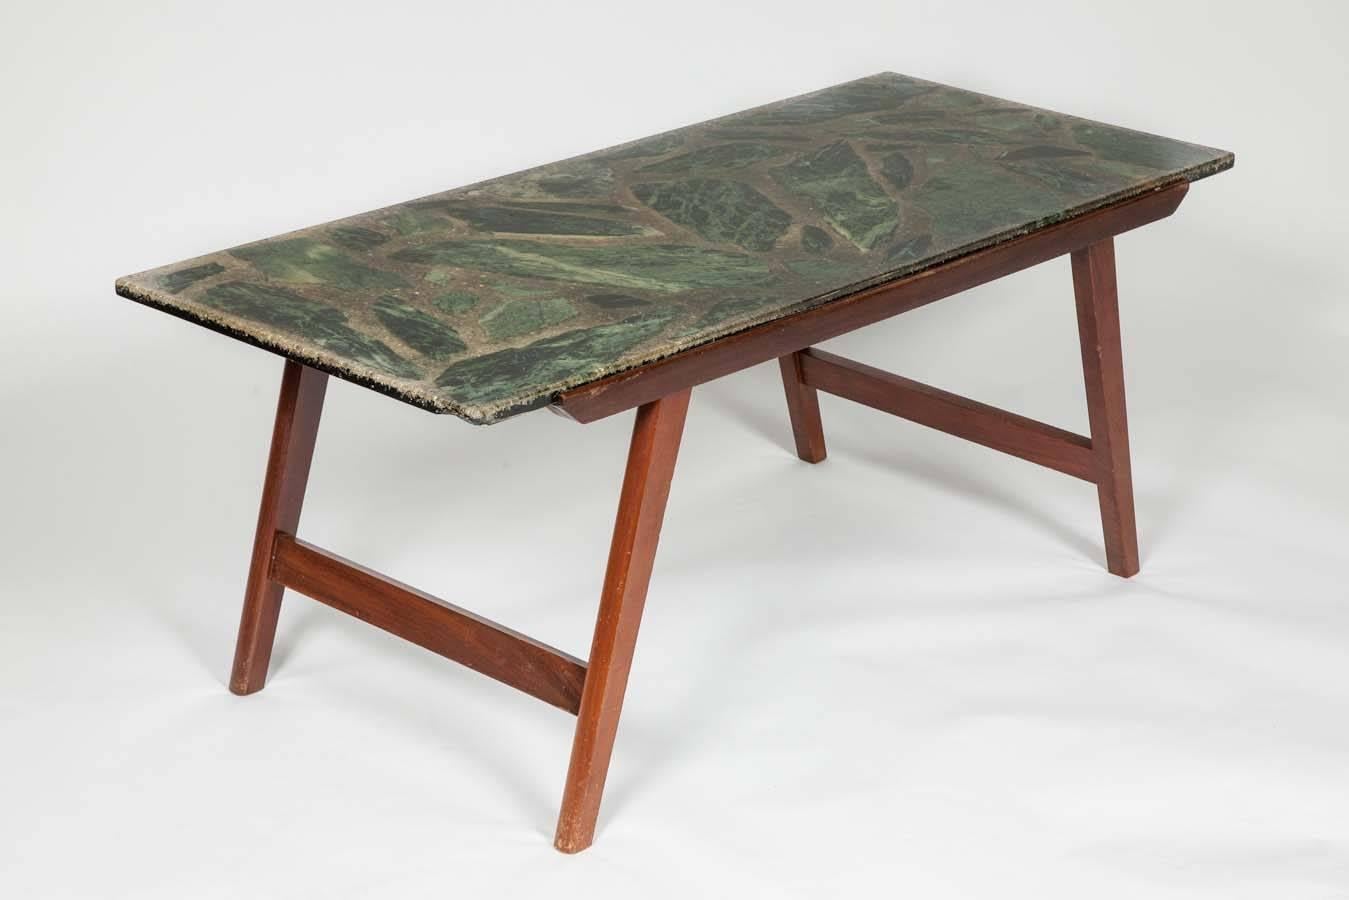 European Green Marble and Resin Danish Style Coffee Table with Angled Base